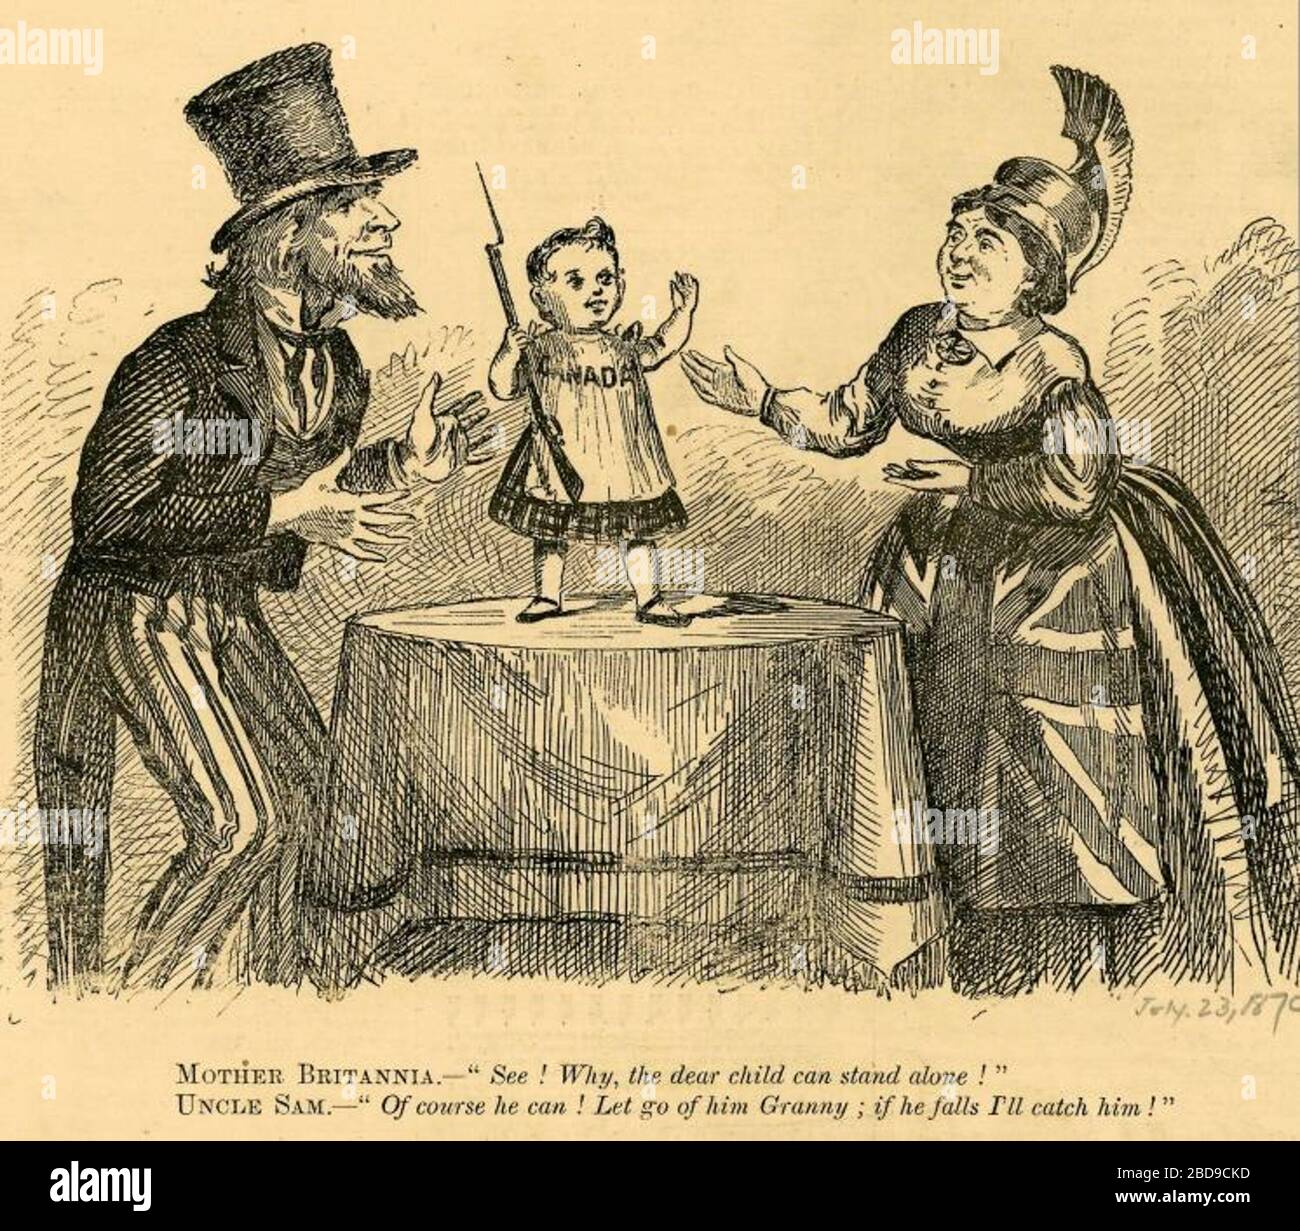 'Canada; English: Published in July 1870, when Canada took possession of Rupert's Land following the Red River Rebellion, this cartoon appeared just three years after the birth of Canada in 1867.  Canada is depicted as a child, with Great Britain, represented as Mother Britannia, holding out her protective arms. Uncle Sam, representing the United States, stands on the other side, ready to grab the child if it falls. Deutsch: Erschienen im Juli 1870, als Kanada Besitz von Ruperts Land nahm im Anschluss an die Red River Rebellion. Diese Karikatur erschien nur drei Jahre nach der Geburt von Kanad Stock Photo